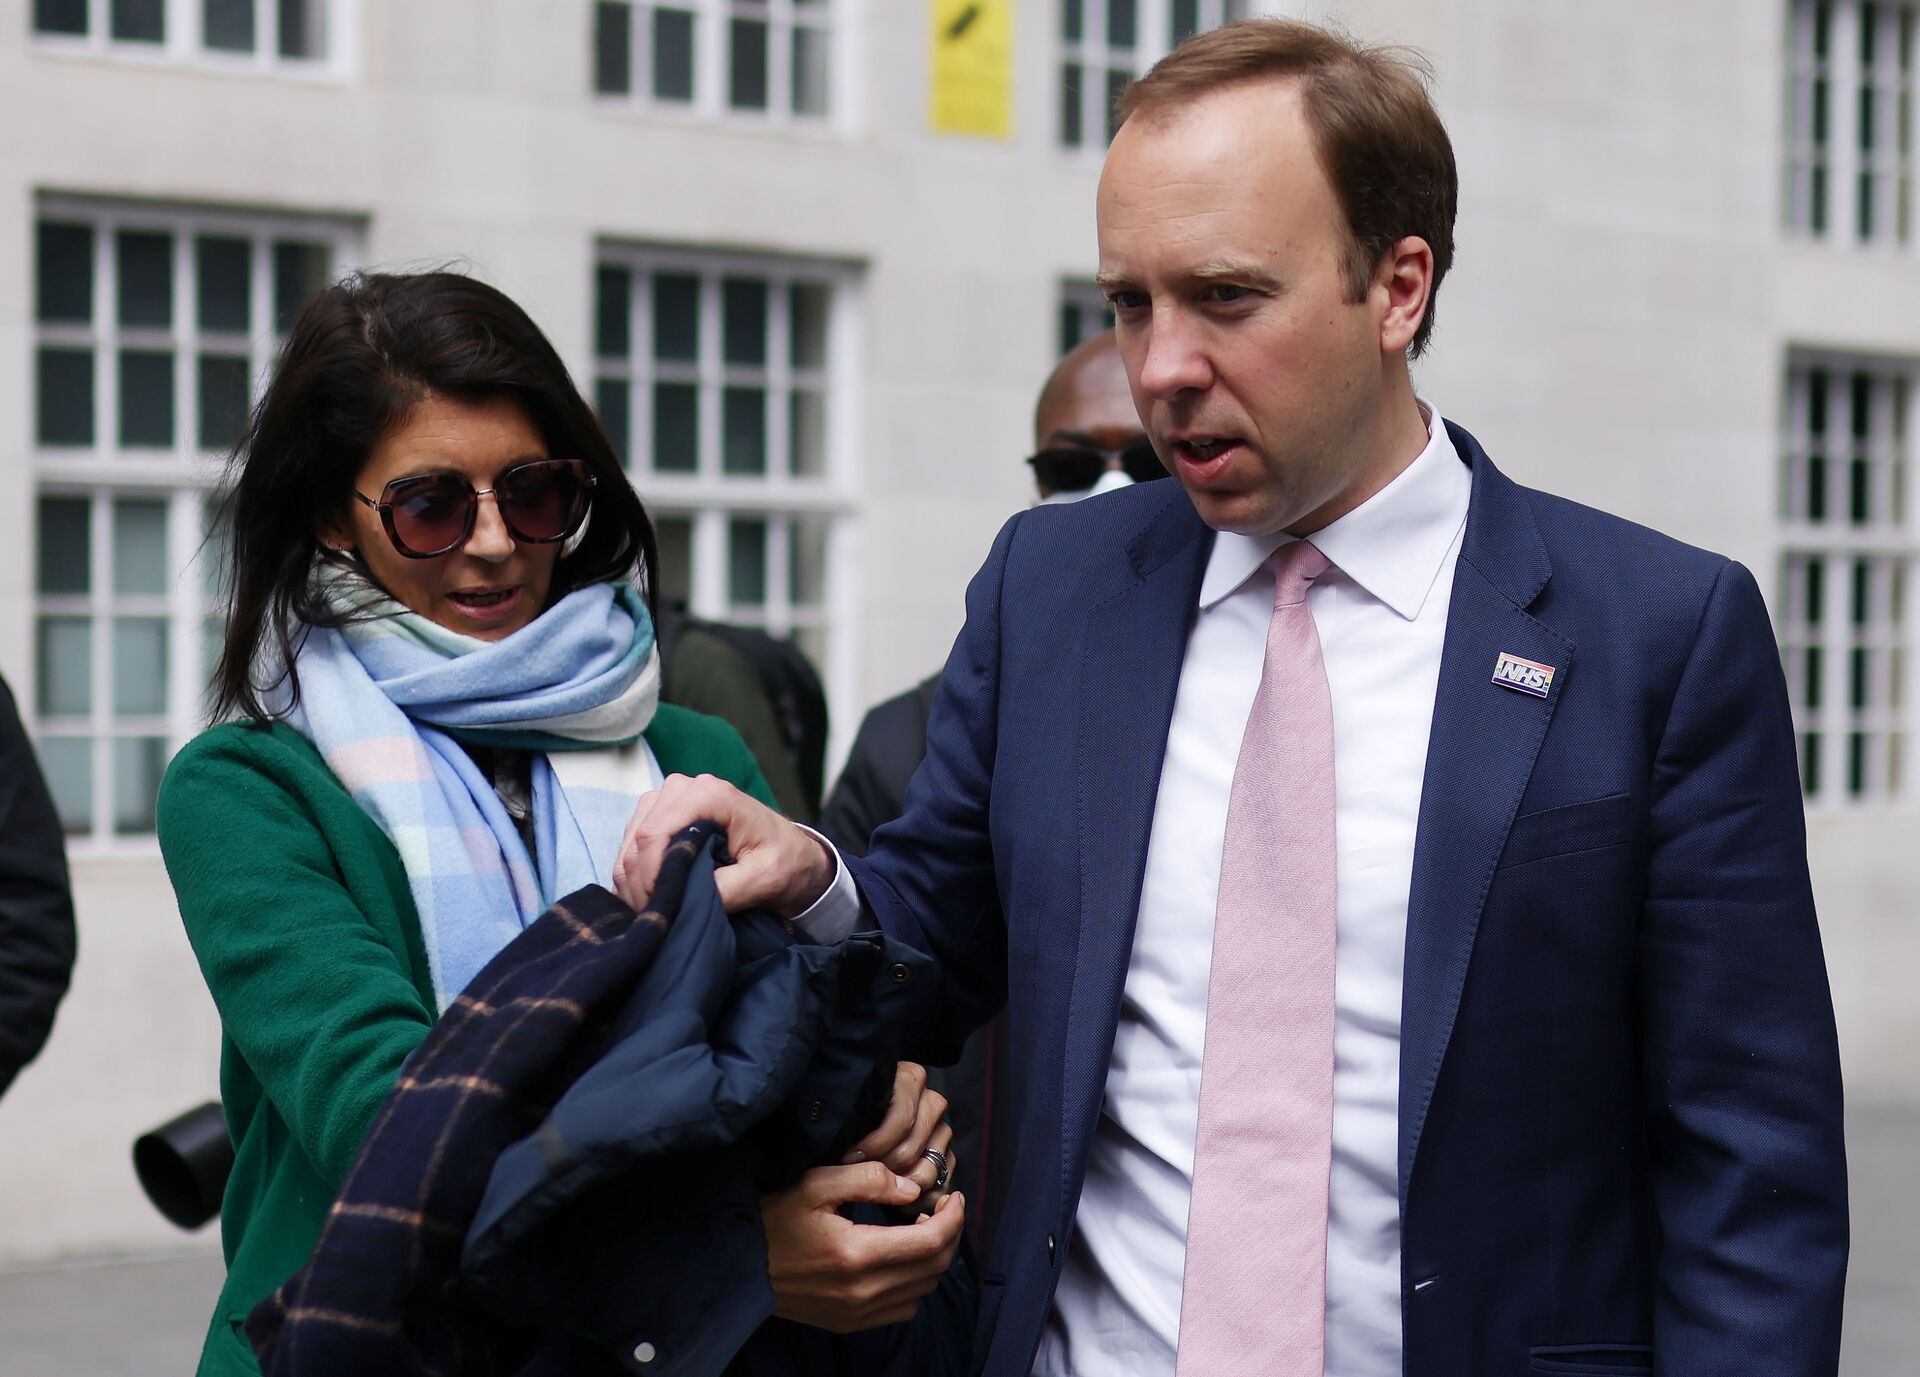 Britain's Health Secretary Matt Hancock hands his coat to his aide Gina Coladangelo (L) before a television interview outside BBC's Broadcasting House in London, Britain, May 16, 2021 - Sputnik International, 1920, 07.09.2021